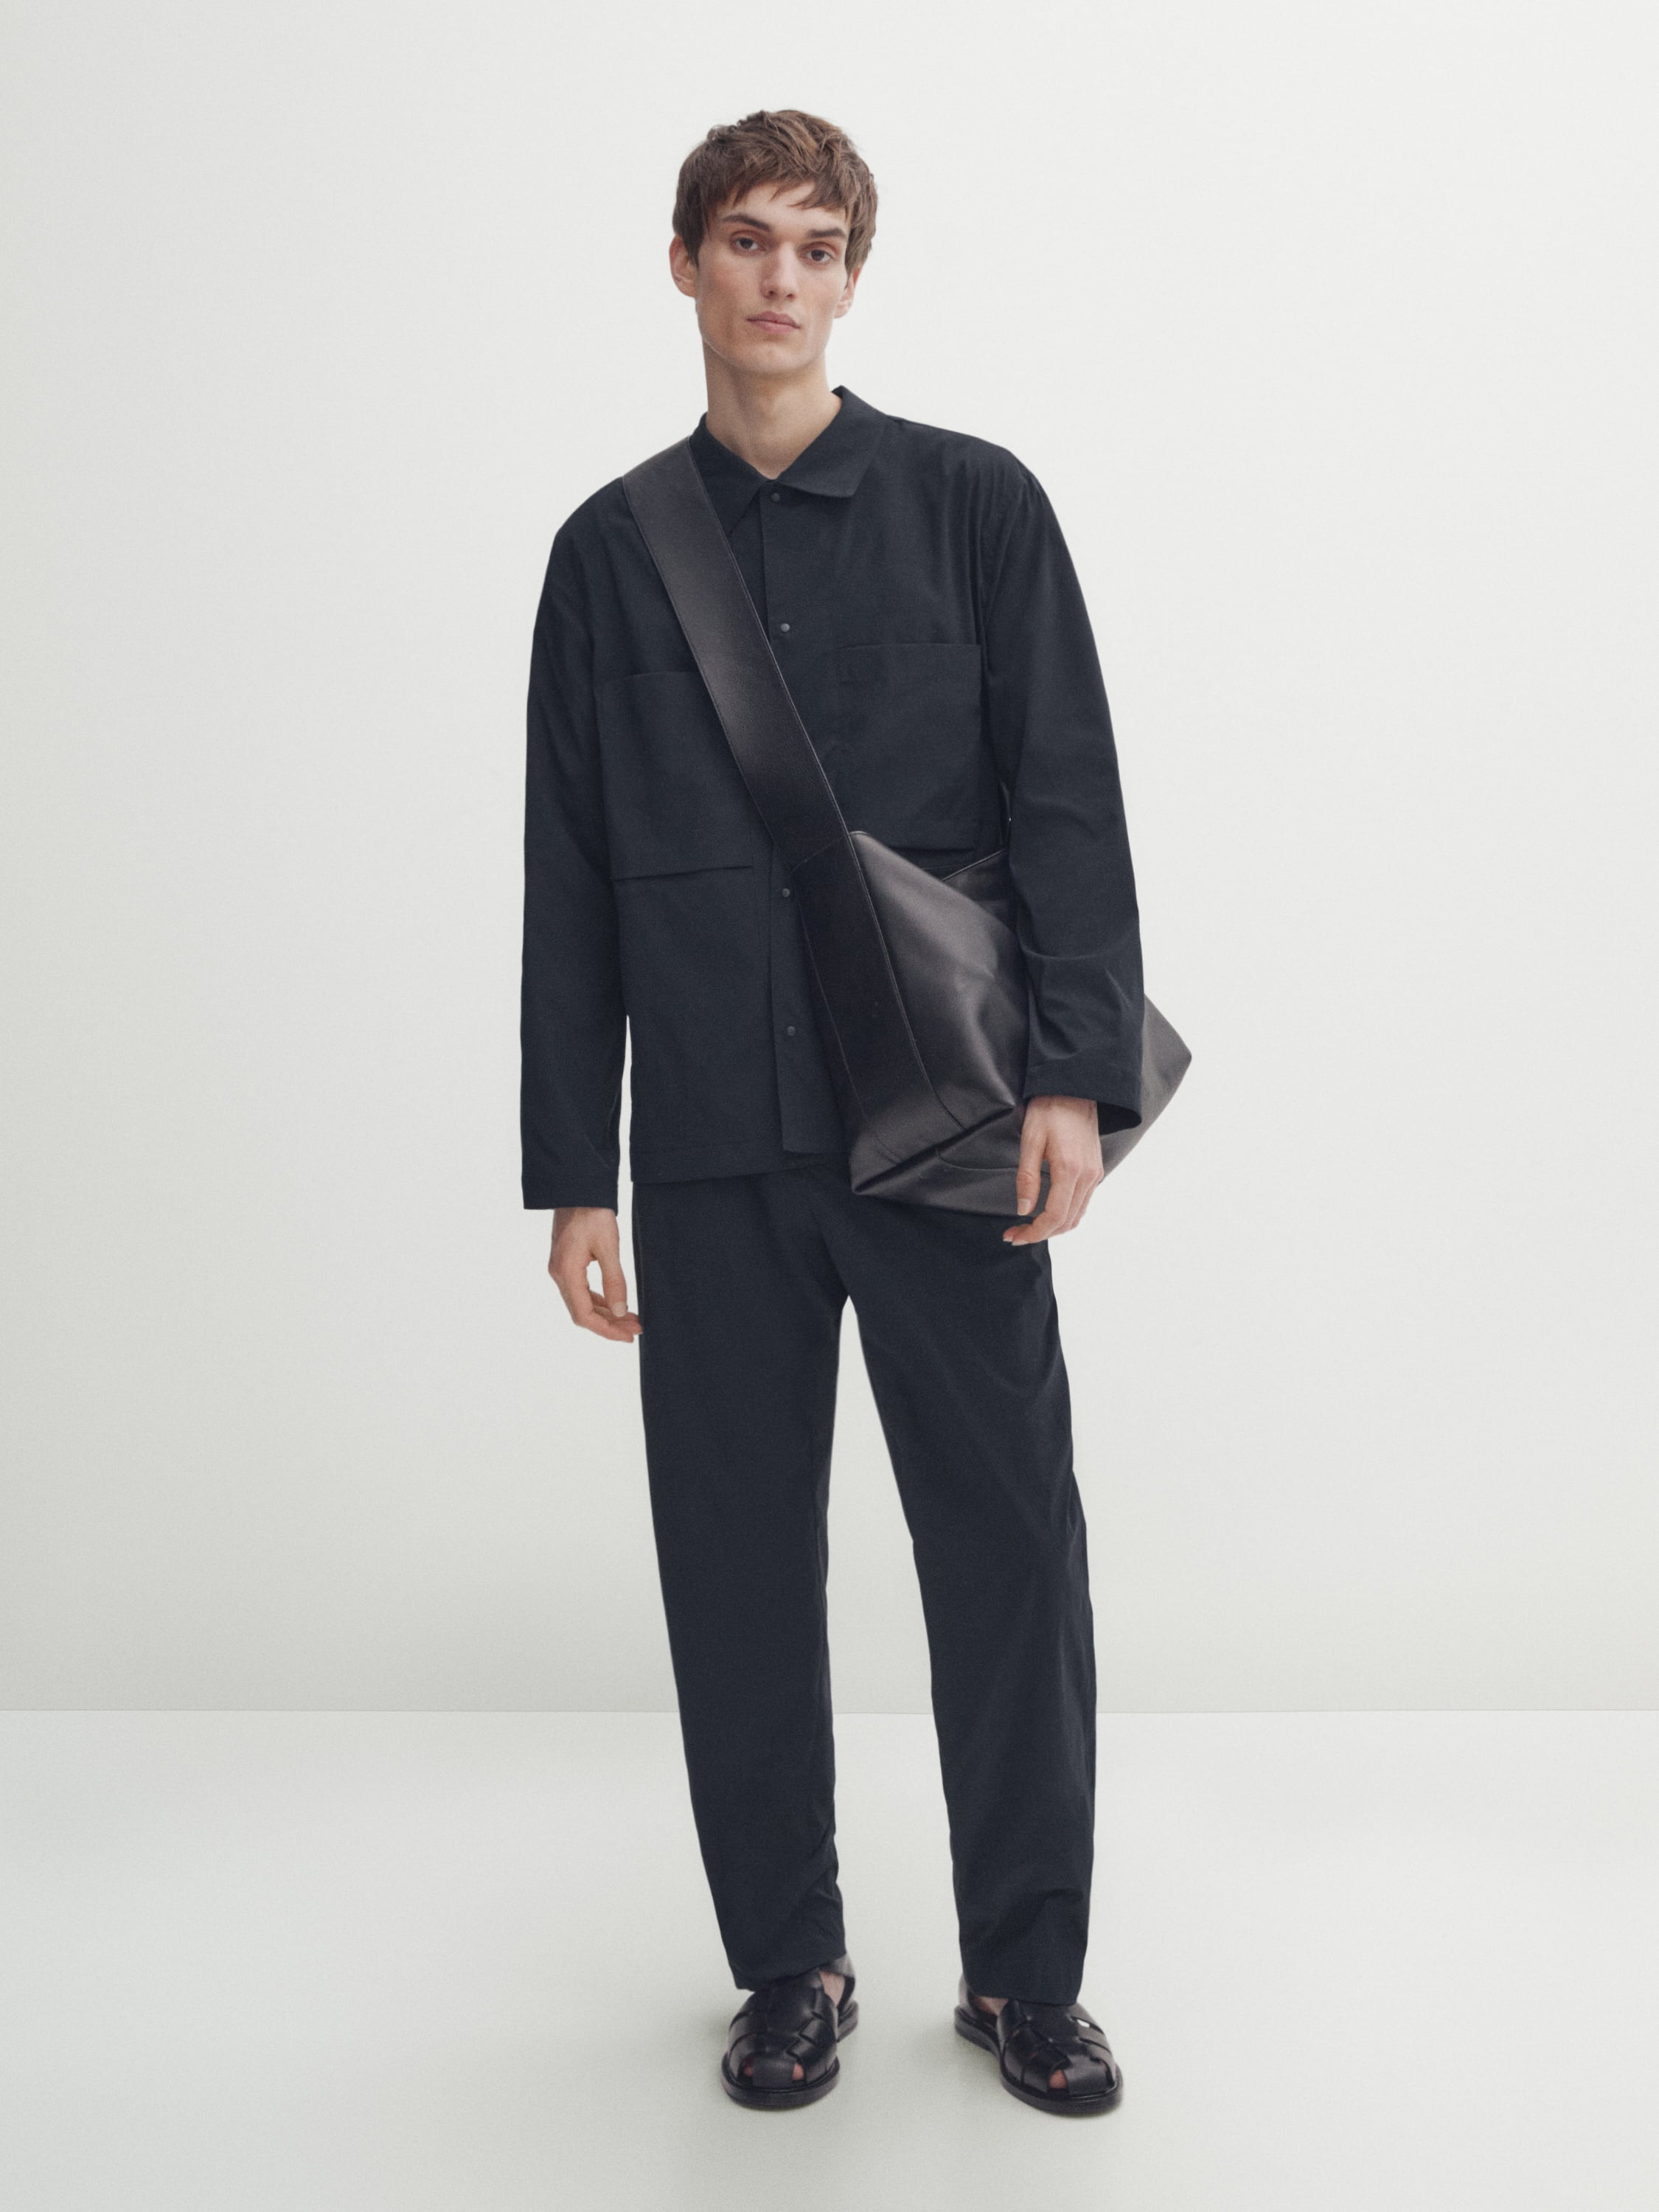 Overshirt with chest pockets - Studio